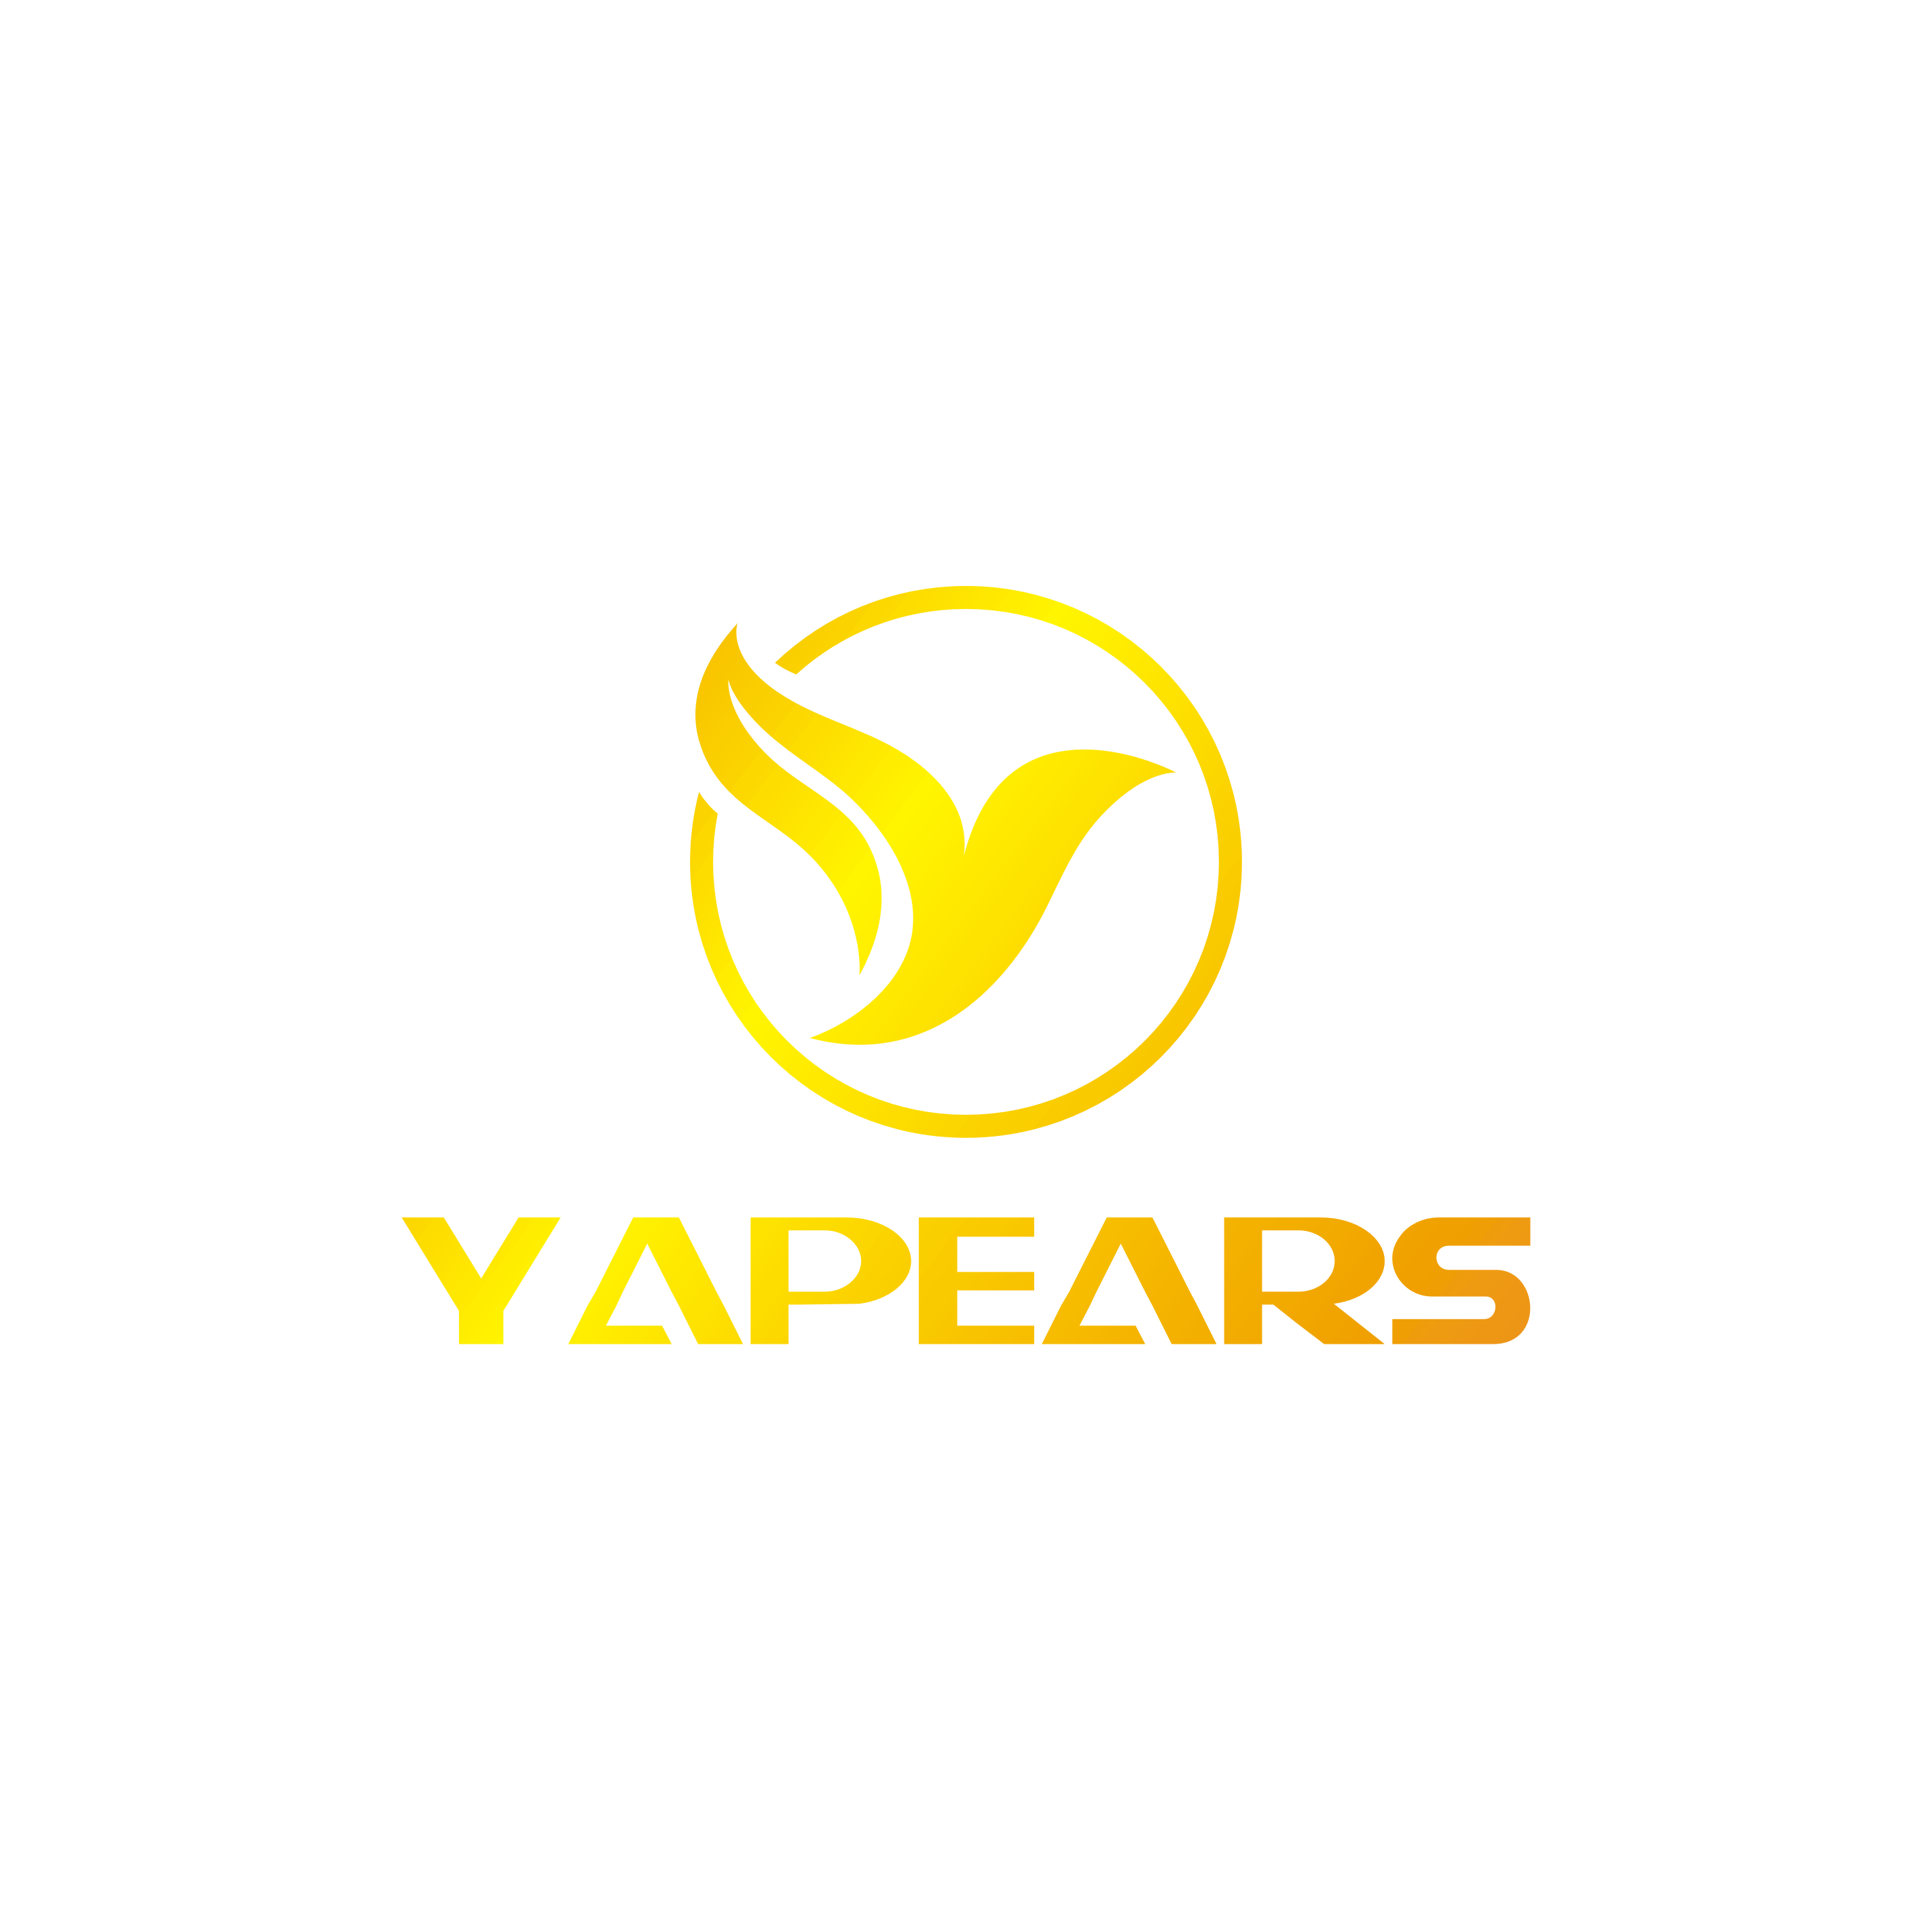 Yapears / Safeguarding your devices since 2010